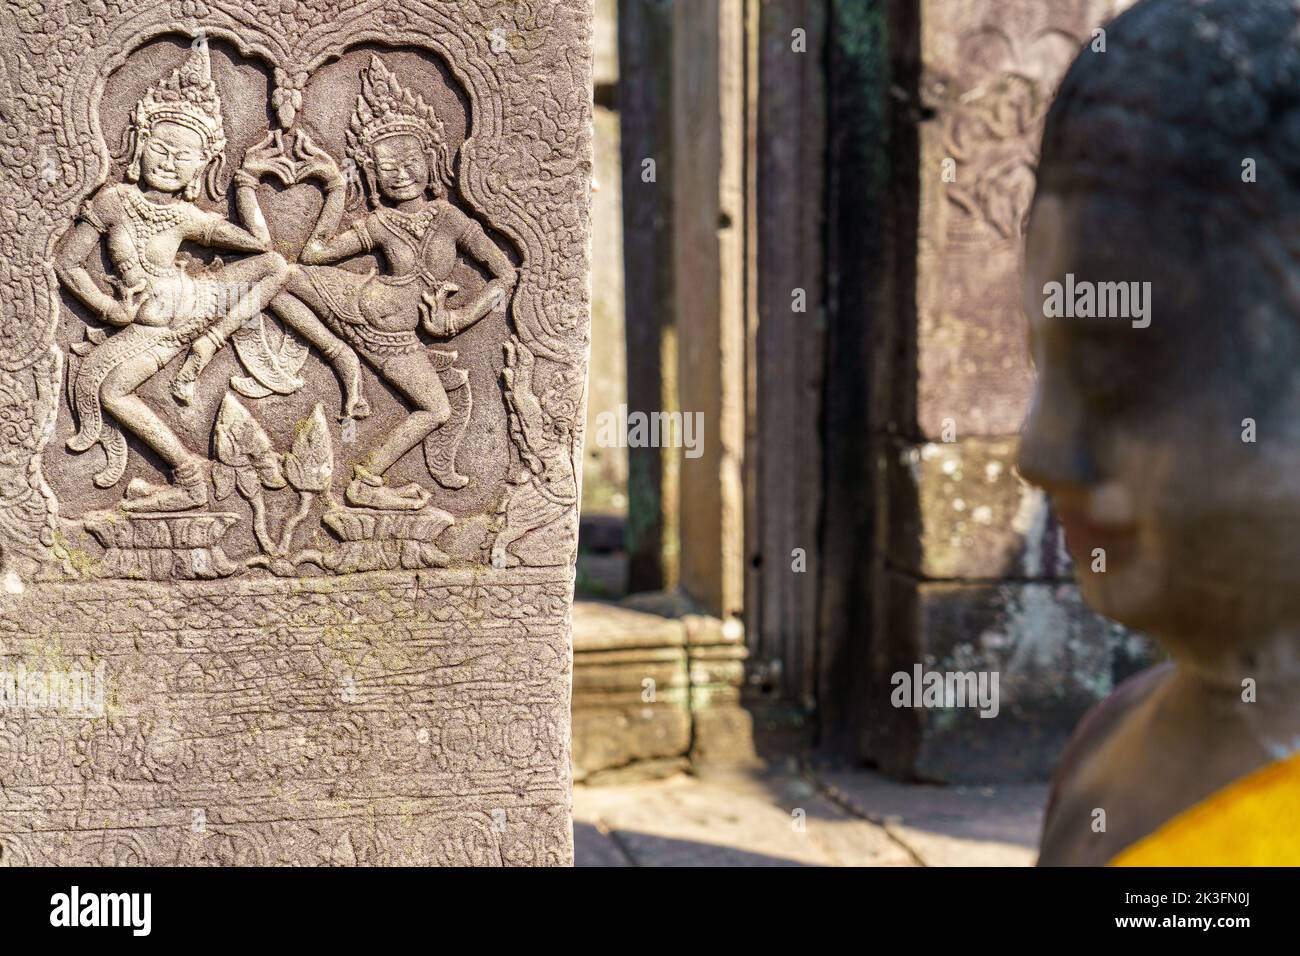 Cambodia. Siem Reap. The archaeological park of Angkor. A bas relief of Aspara dancer at Bayon Temple 12th century Hindu temple Stock Photo